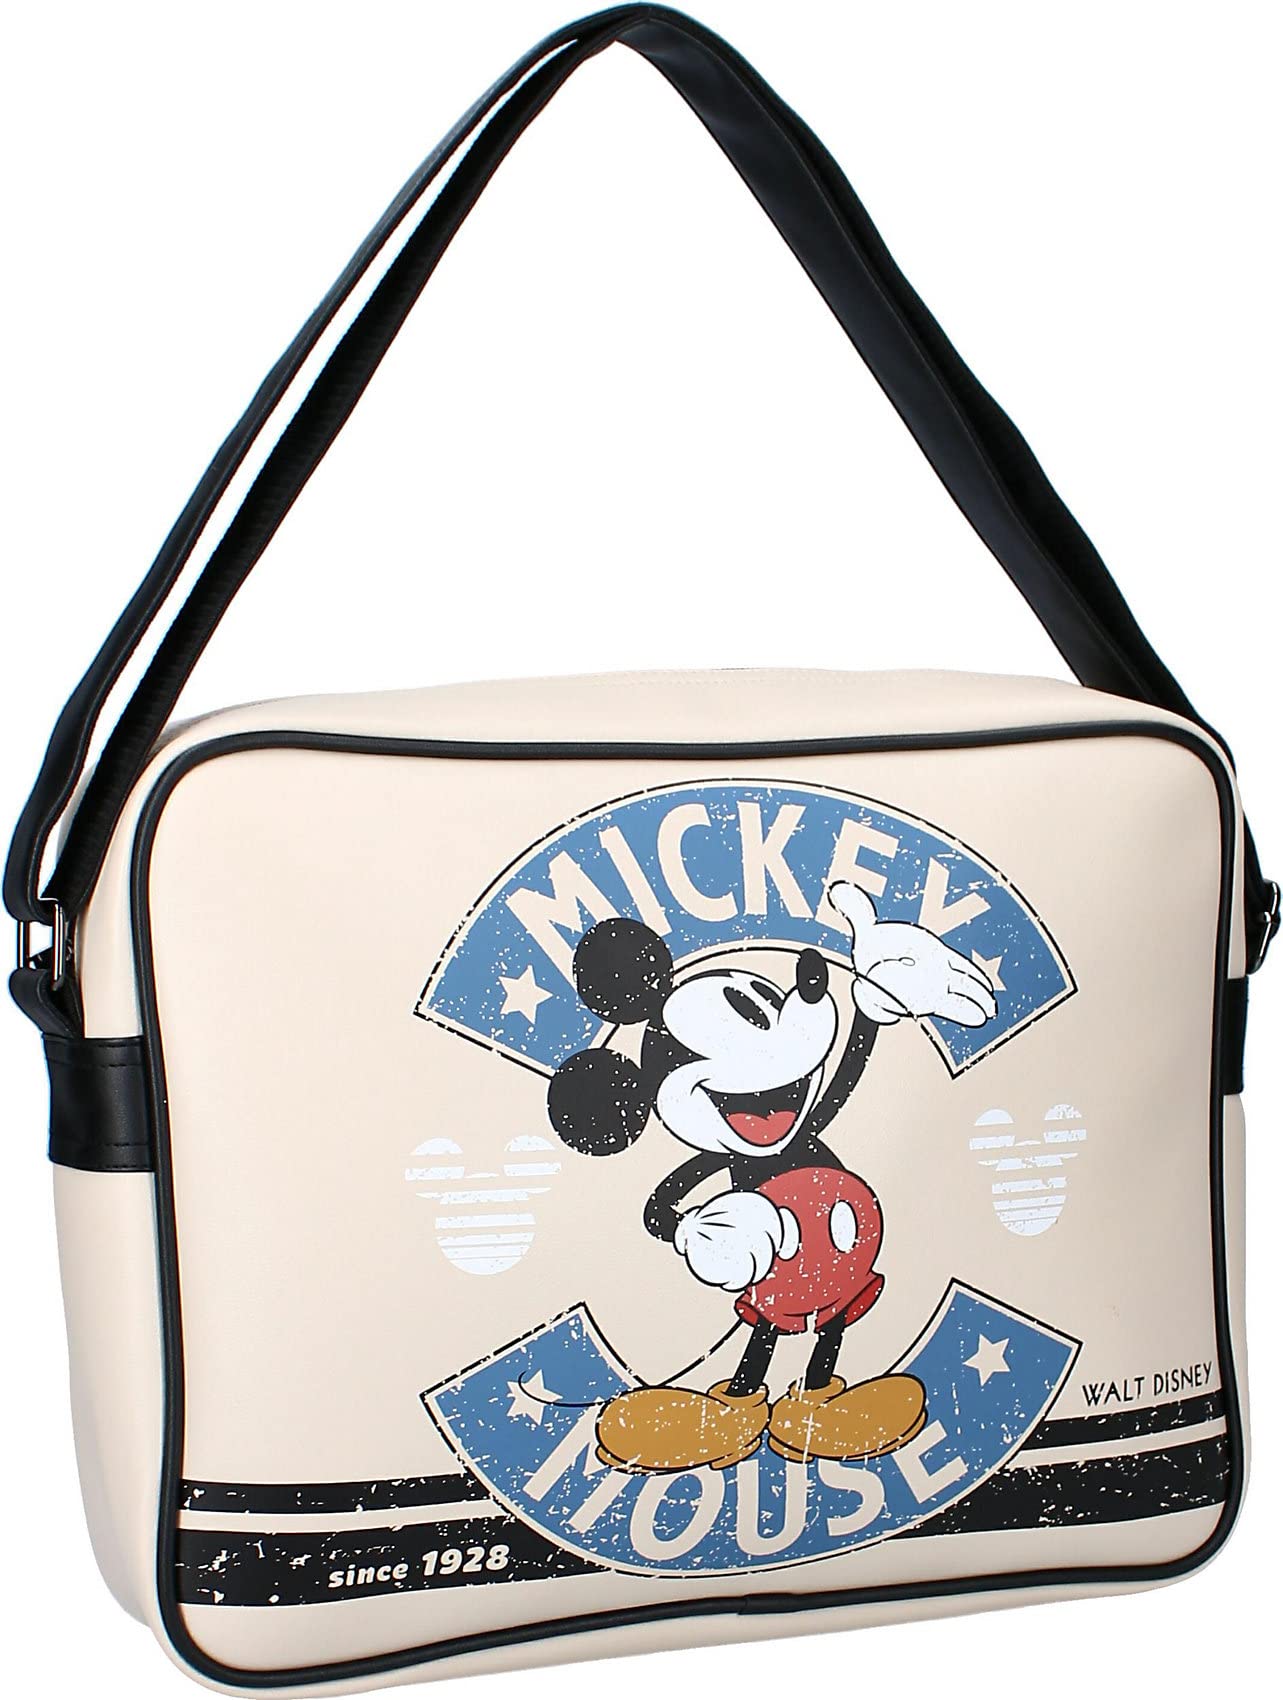 Messengerbag/Umhängetasche Disney Mickey Mouse There's Only One sand